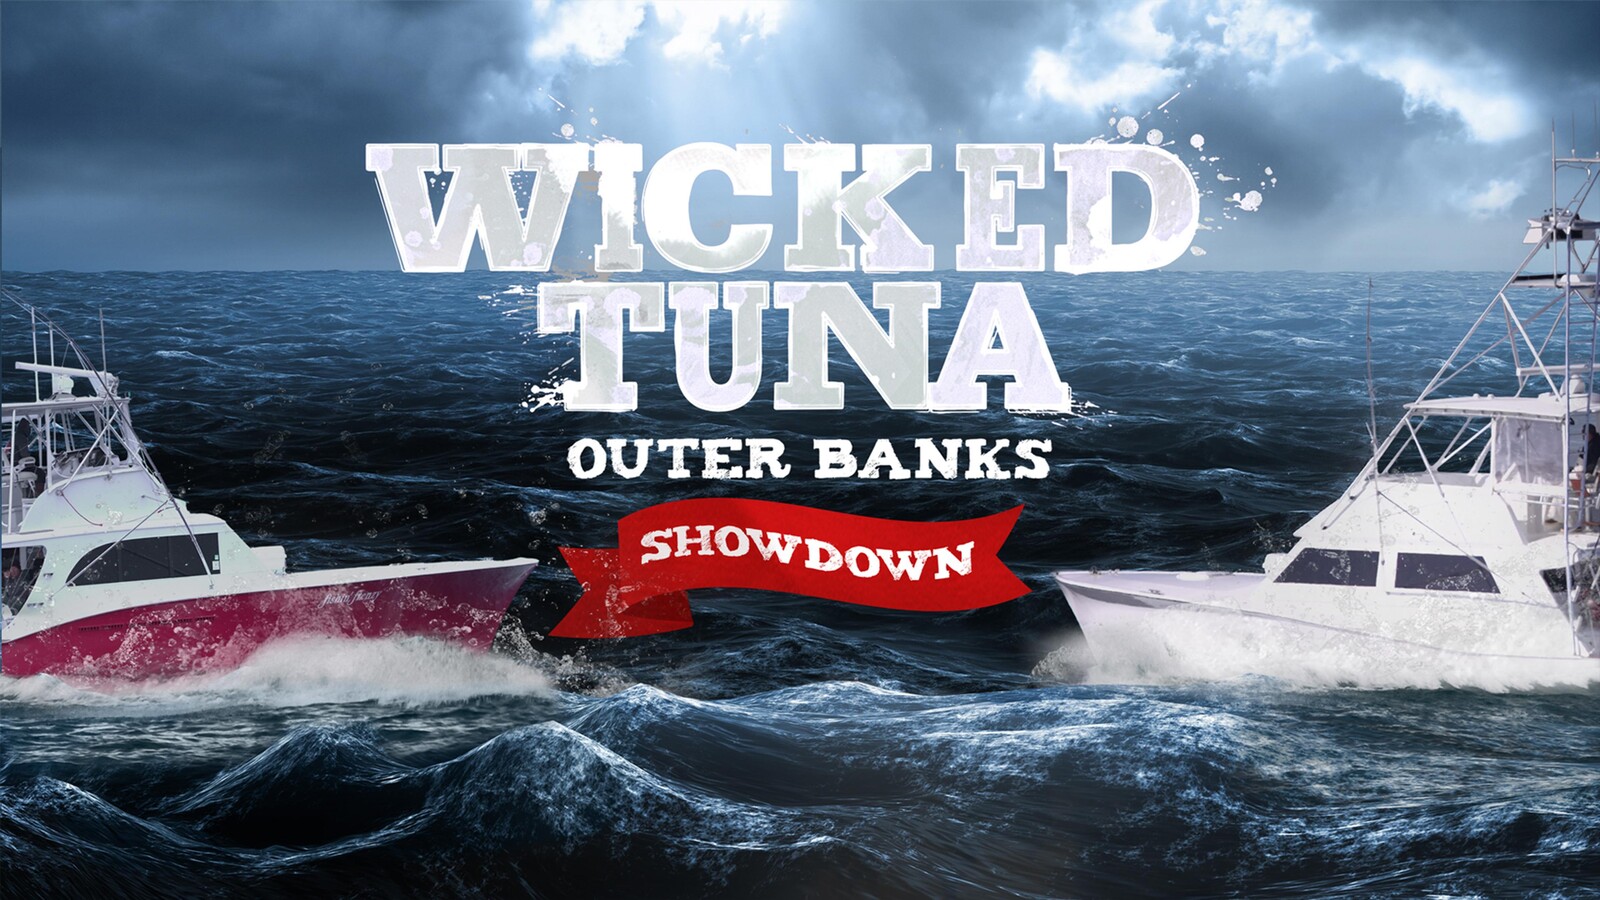 Where to Watch Wicked Tuna: Outer Banks Showdown?